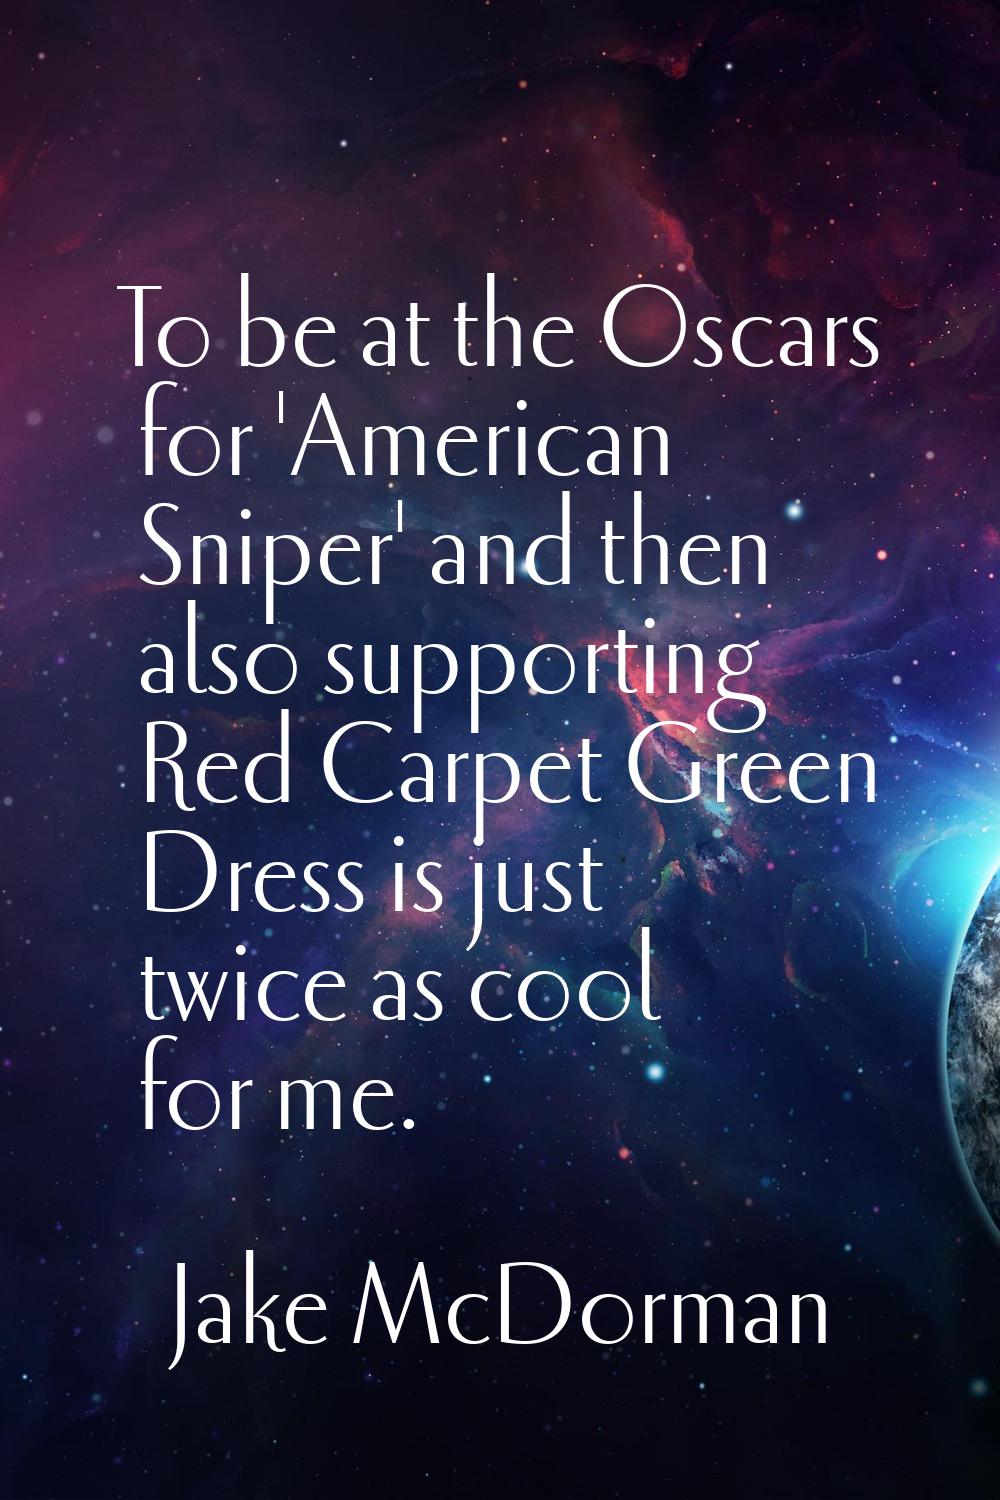 To be at the Oscars for 'American Sniper' and then also supporting Red Carpet Green Dress is just t